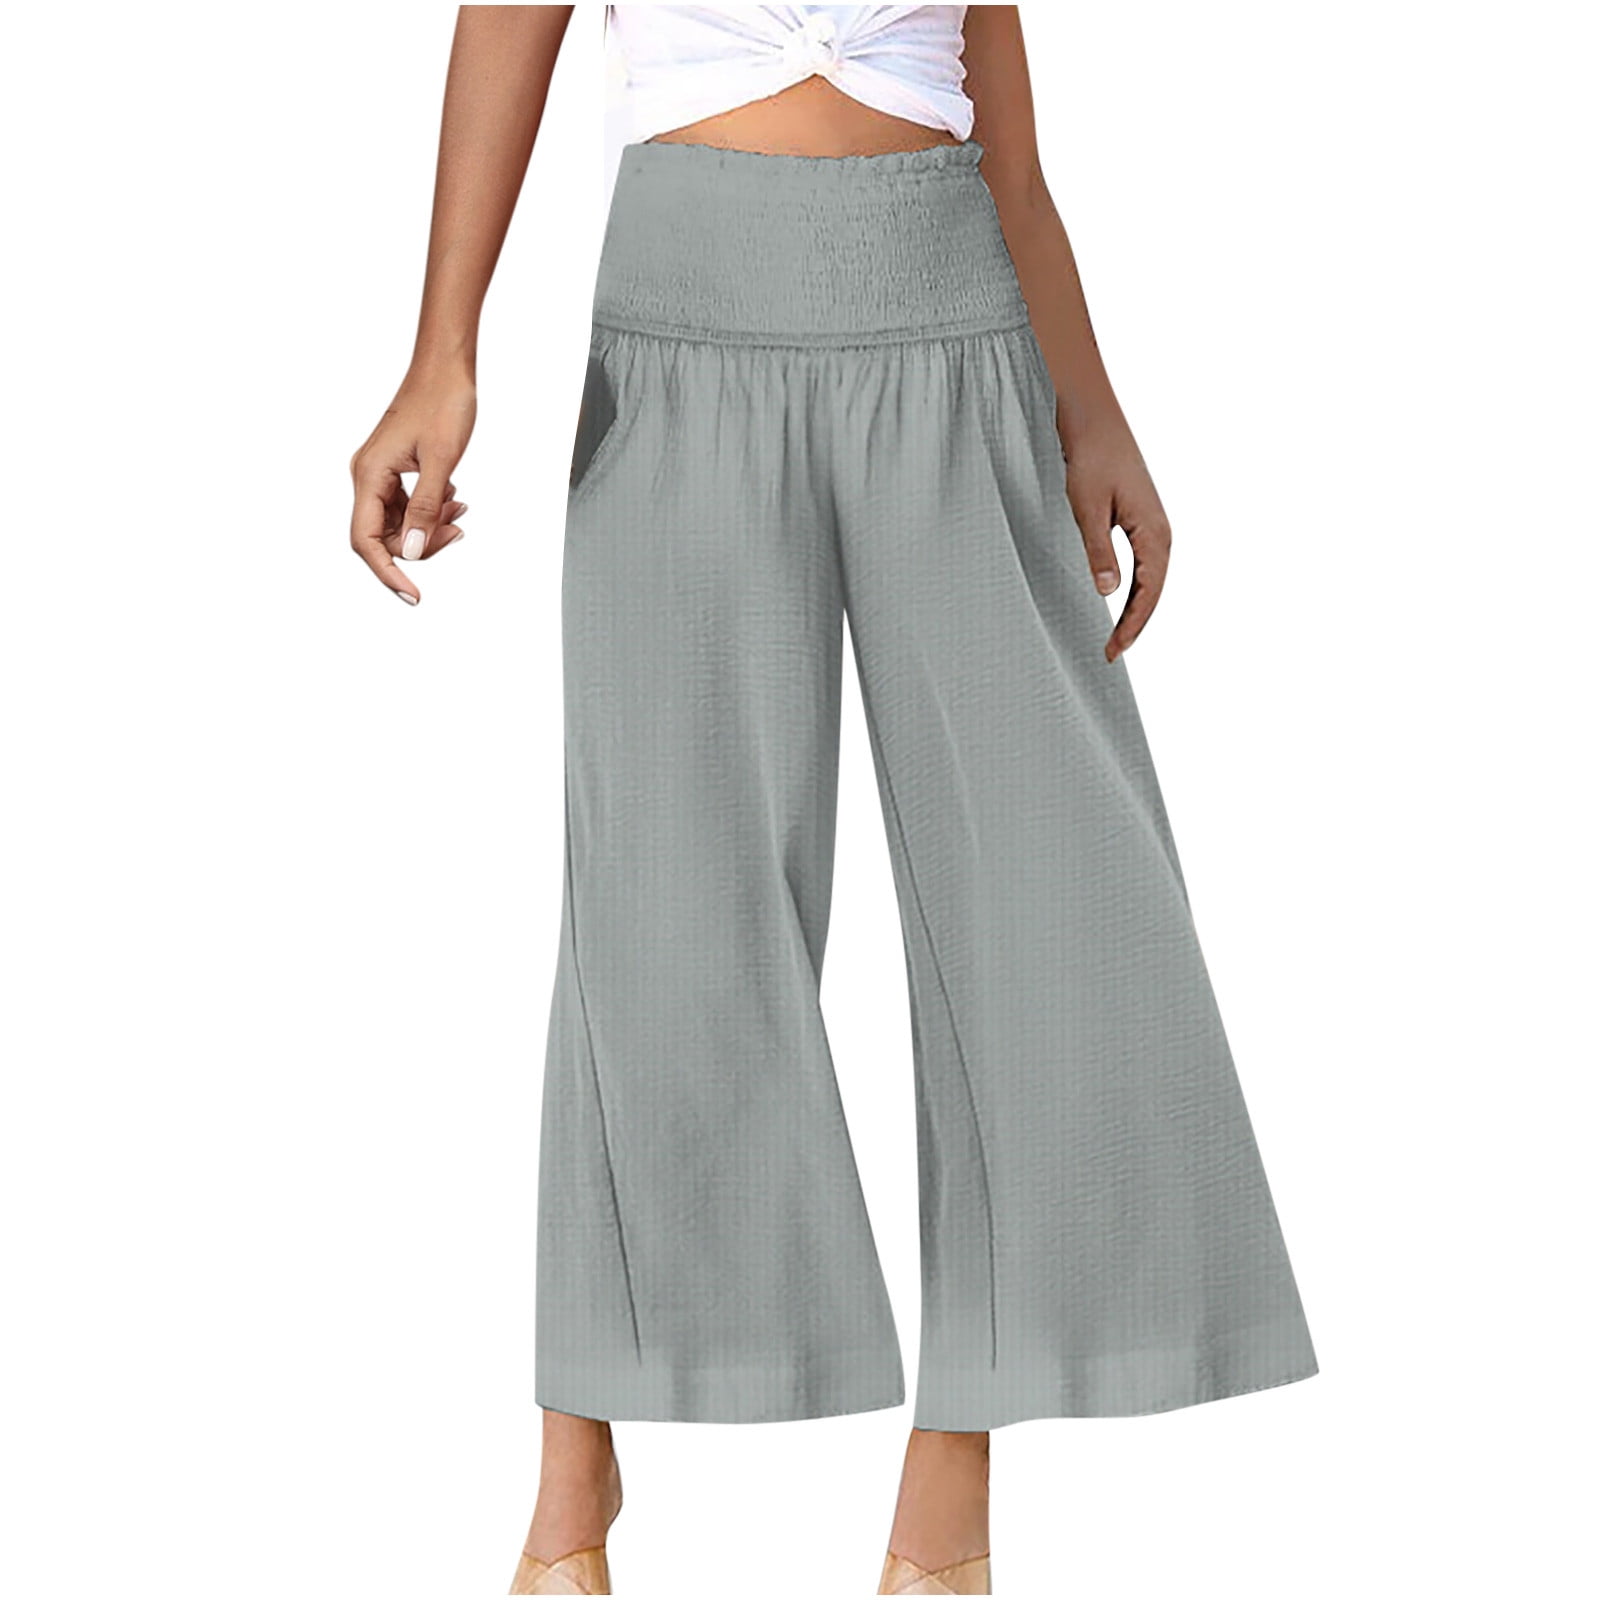 Wide Leg Pants for Women Summer Solid Color High Waist Stretch 7/8 Straight  Pant